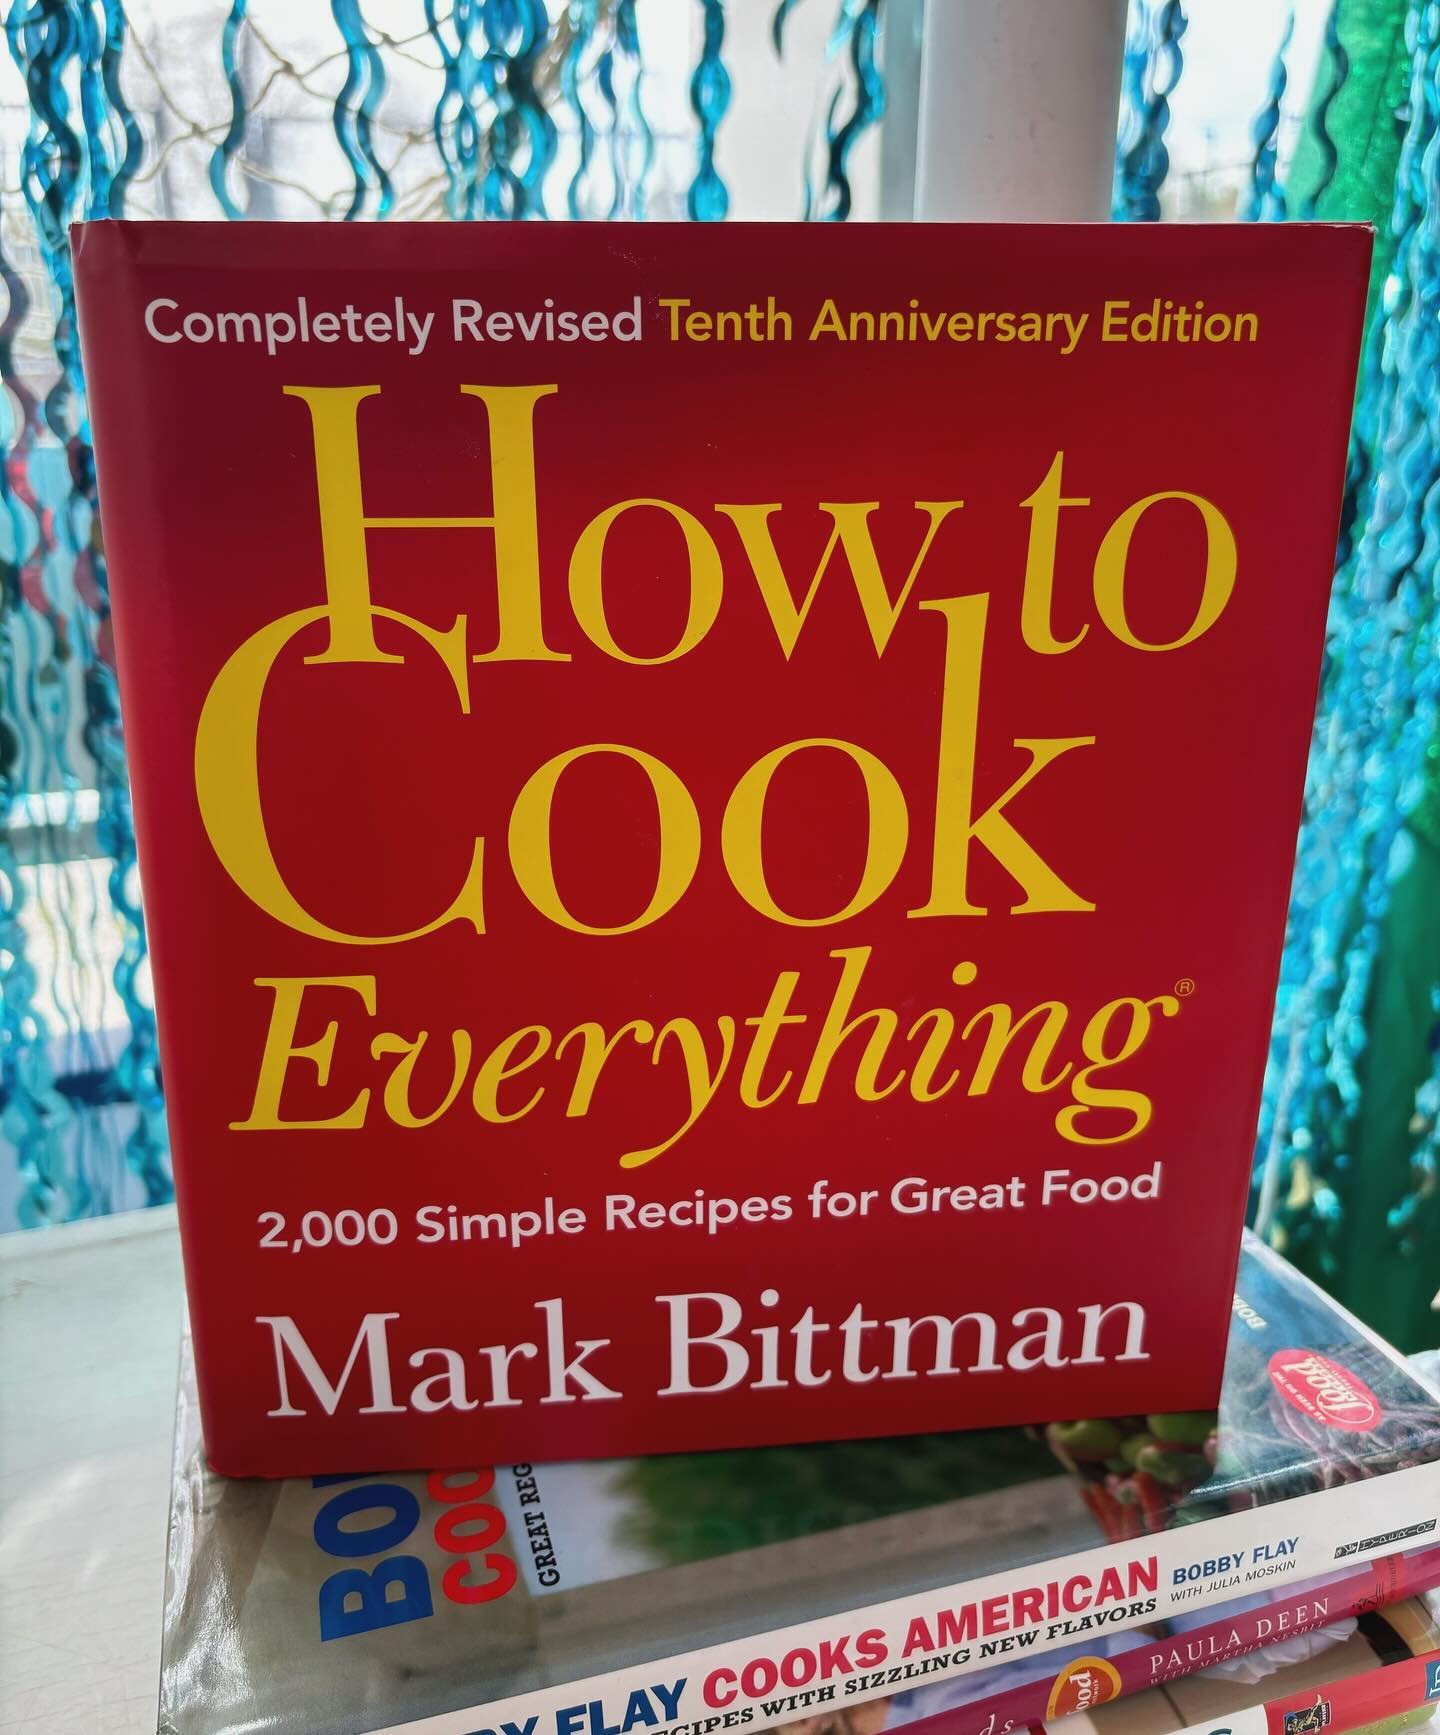 Looking for some recipe inspo and can&rsquo;t decide what to make? 🥘🍽️🍝 We&rsquo;ve got you covered! Stop by this week and pick up a premium cookbook at not so premium prices!! 

#cookbook #cookbooksofinstagram #secondhandbooks #shopsecpndhandfirs